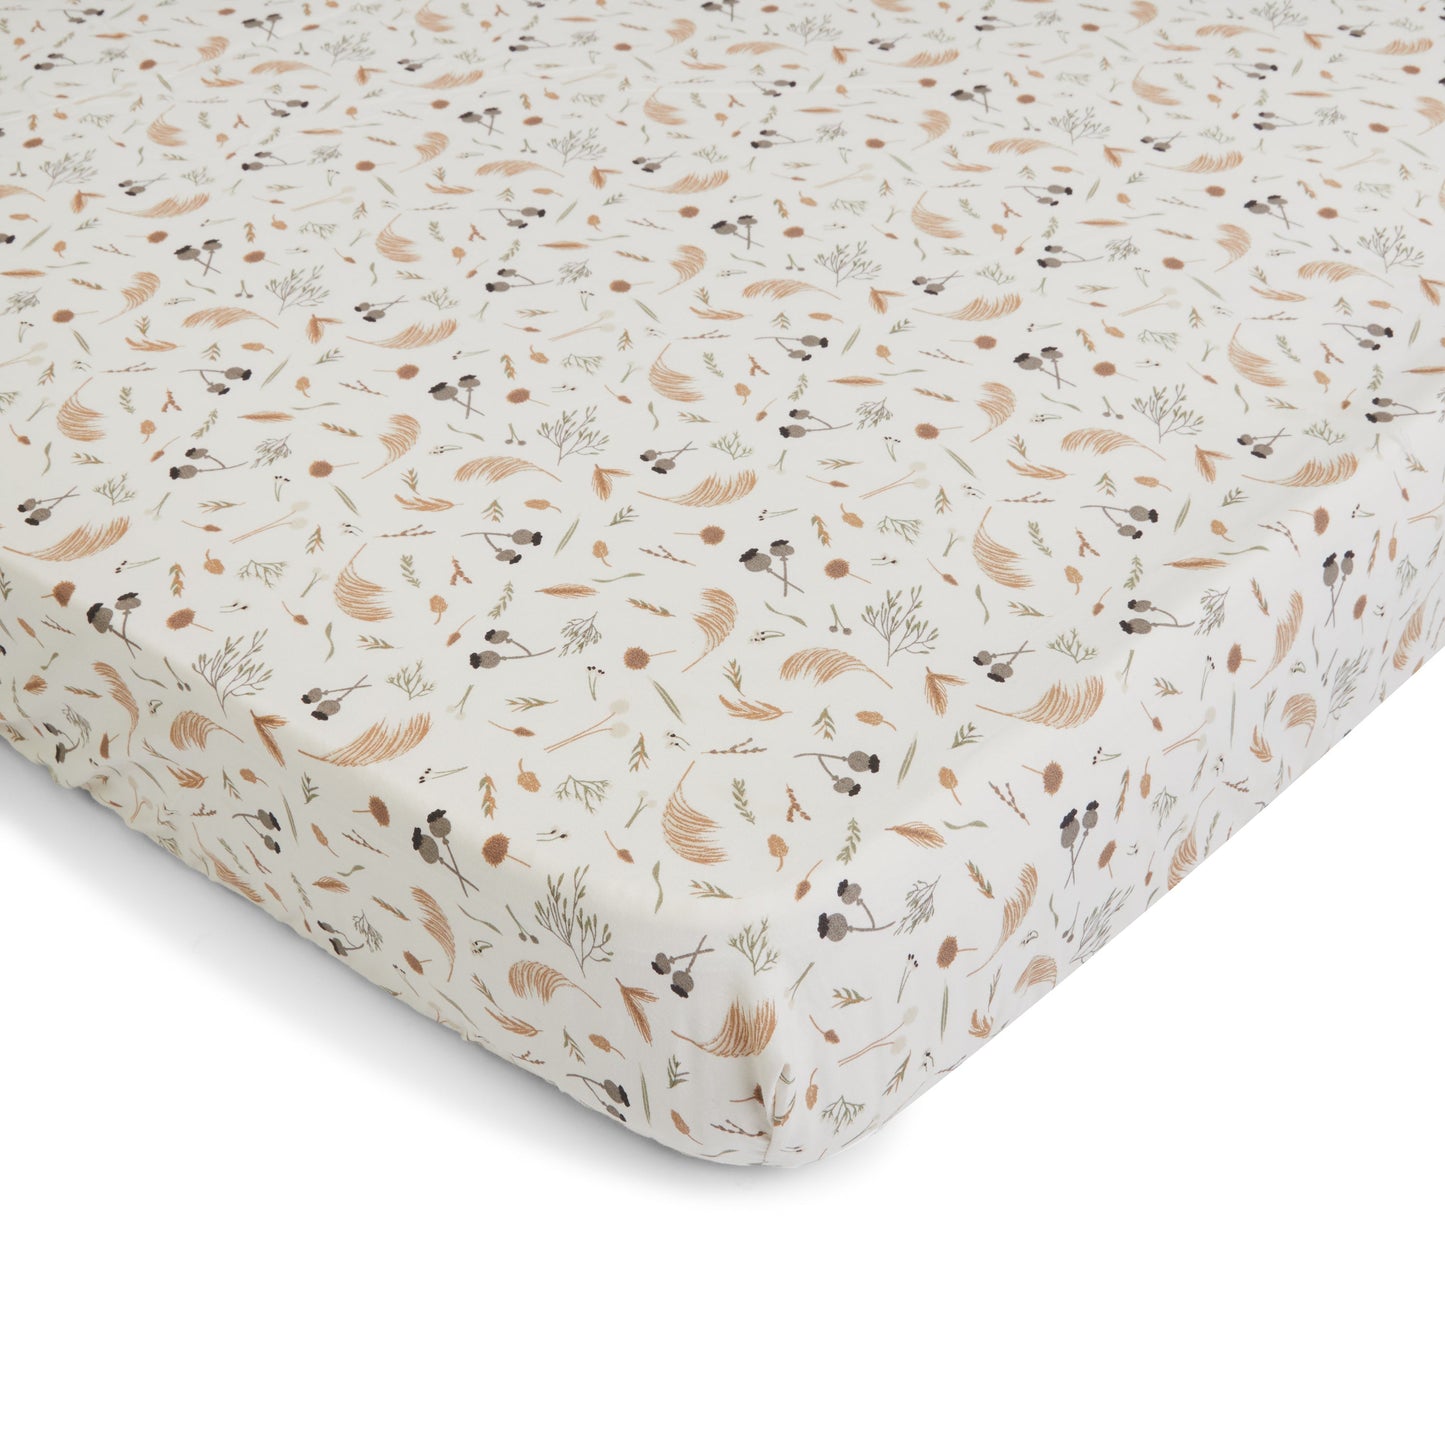 Avery Row Cotbed Fitted Sheet - Grasslands